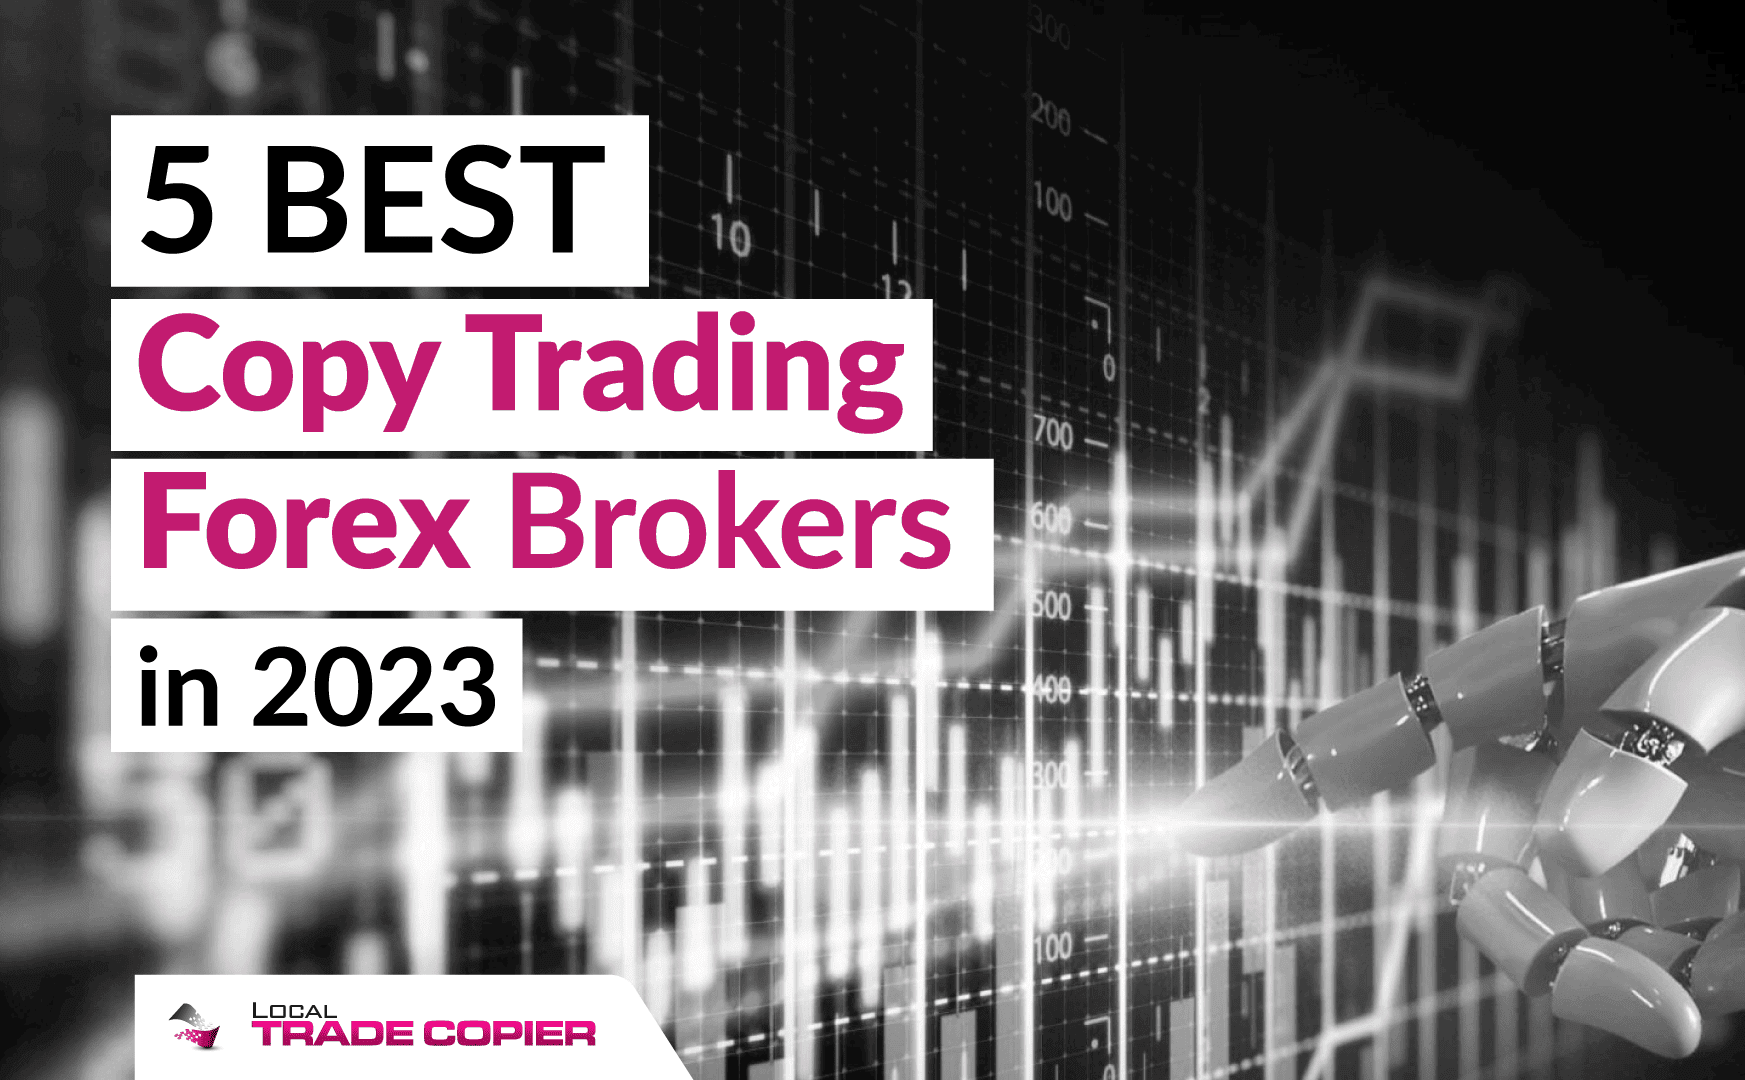 5 Best Copy Trading Forex Brokers in 2023